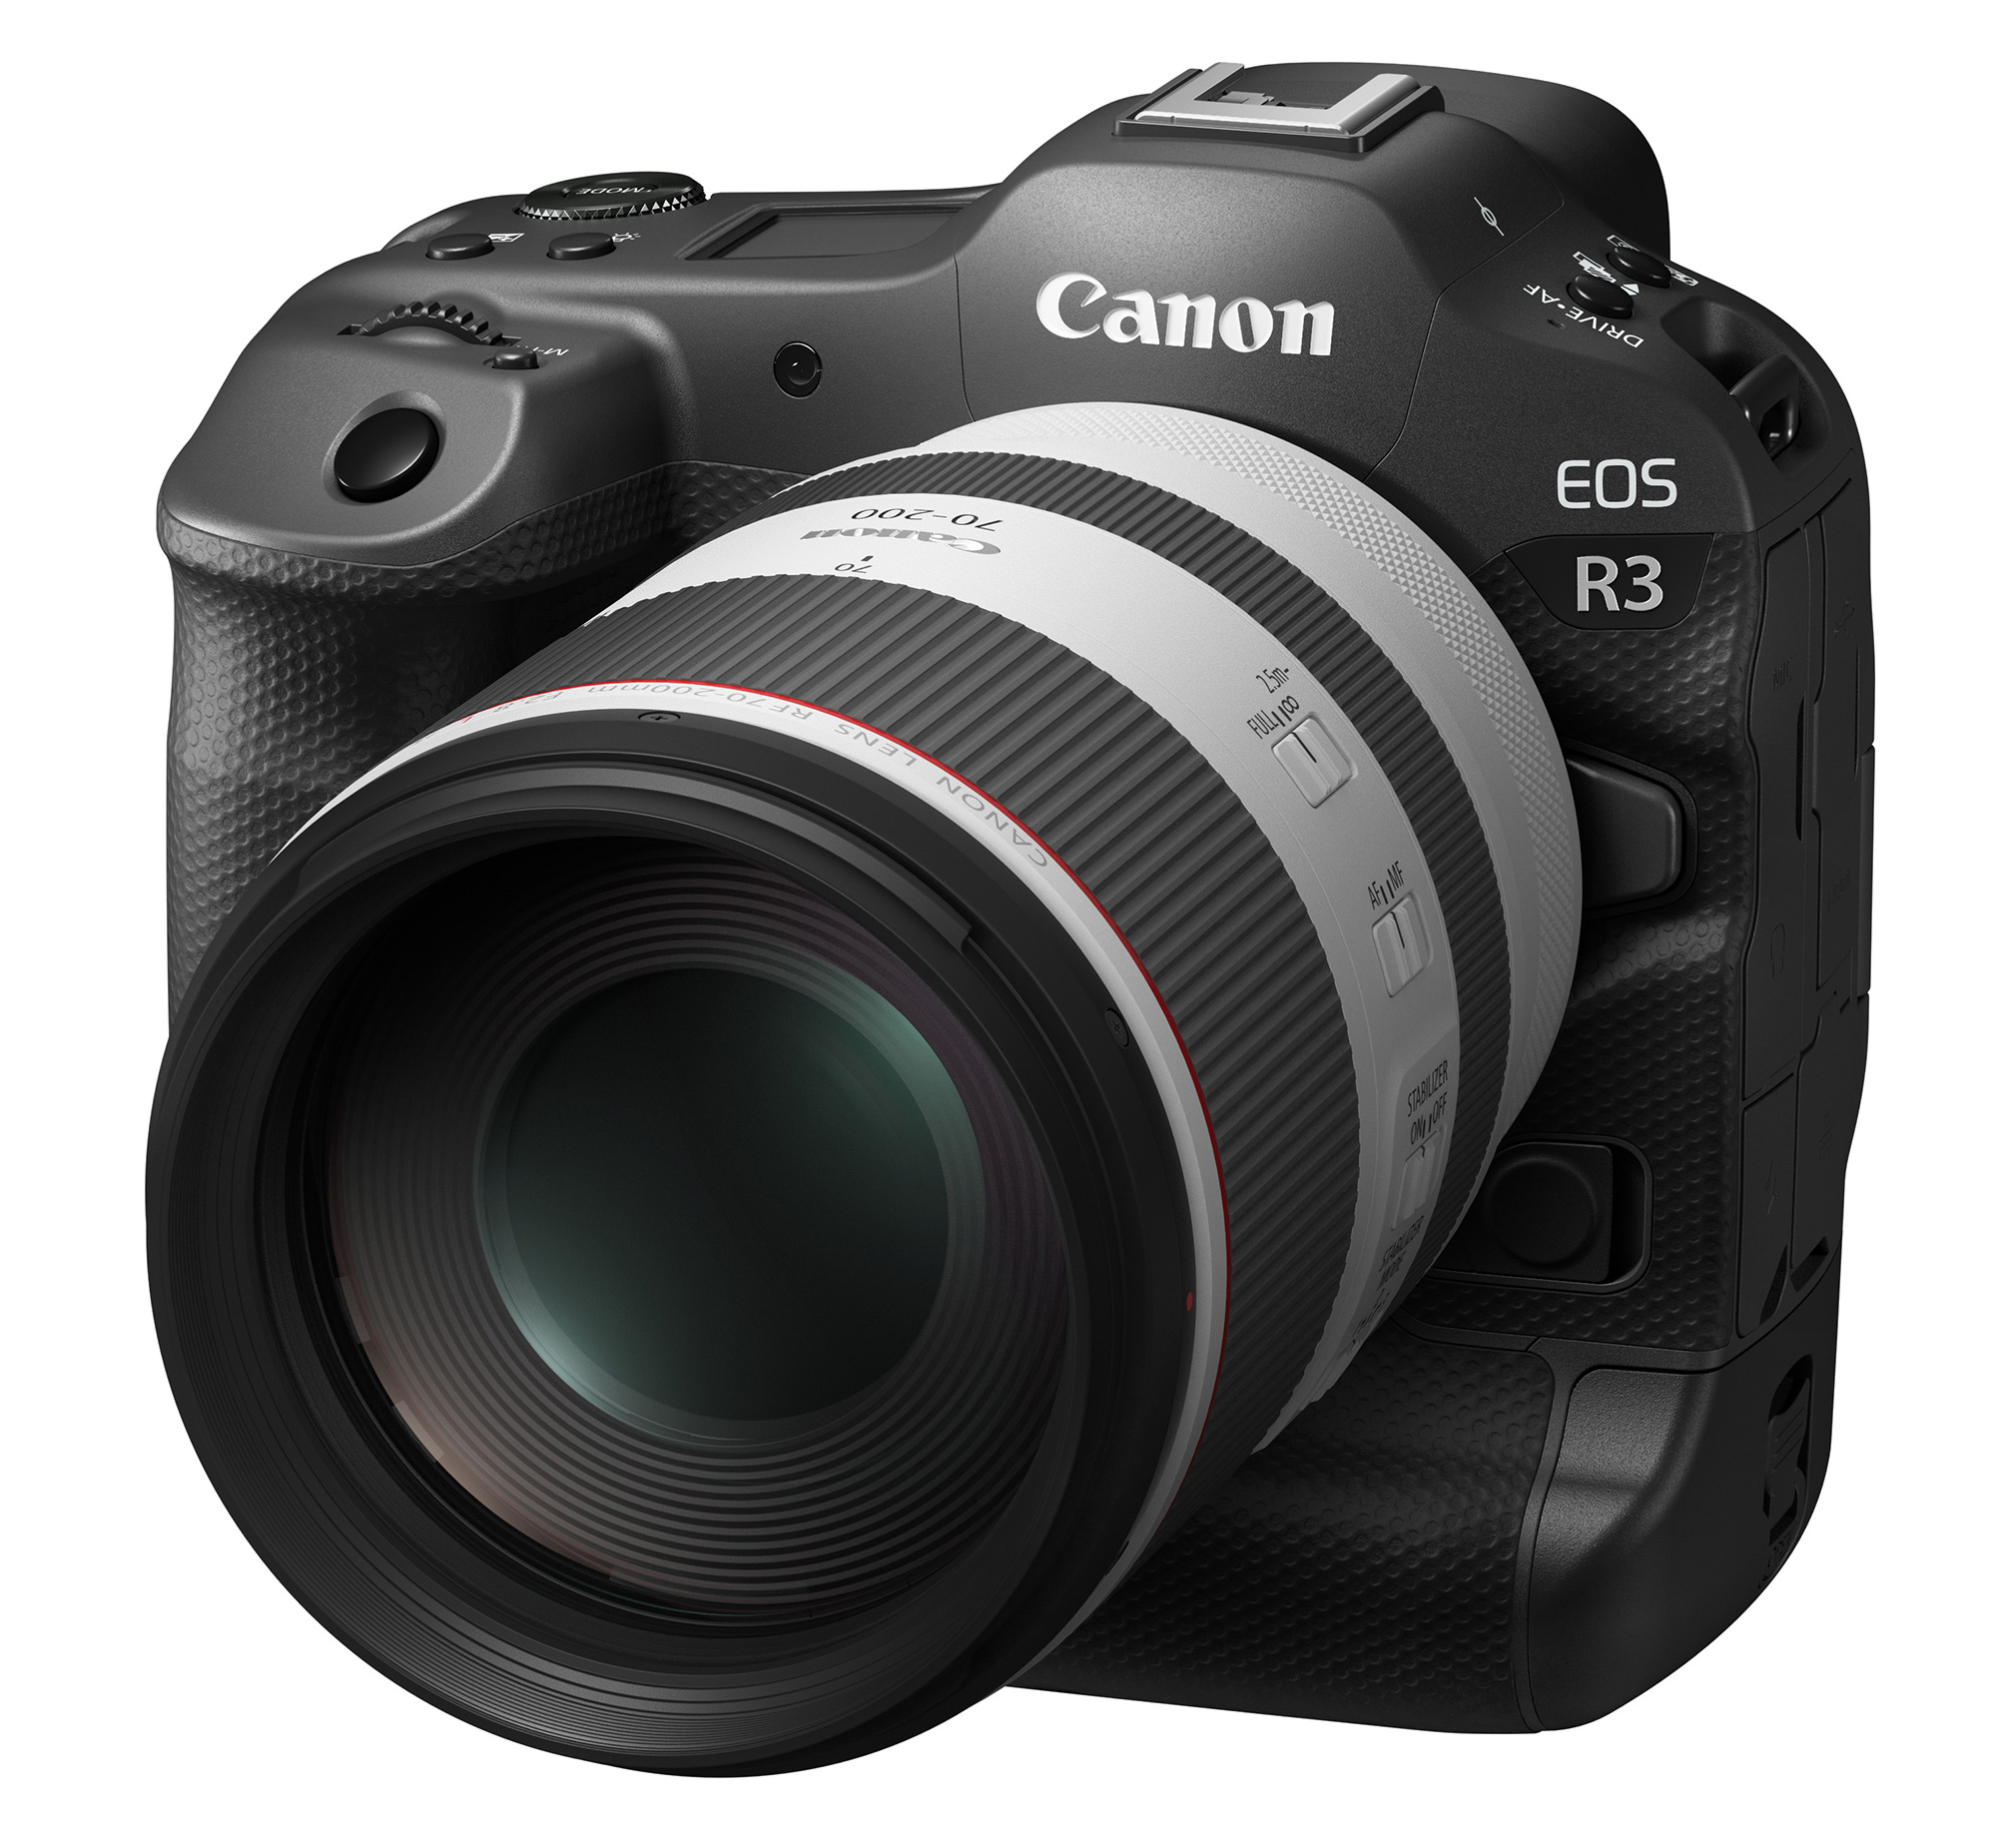 Canon EOS R3 and some lenses not available for many months